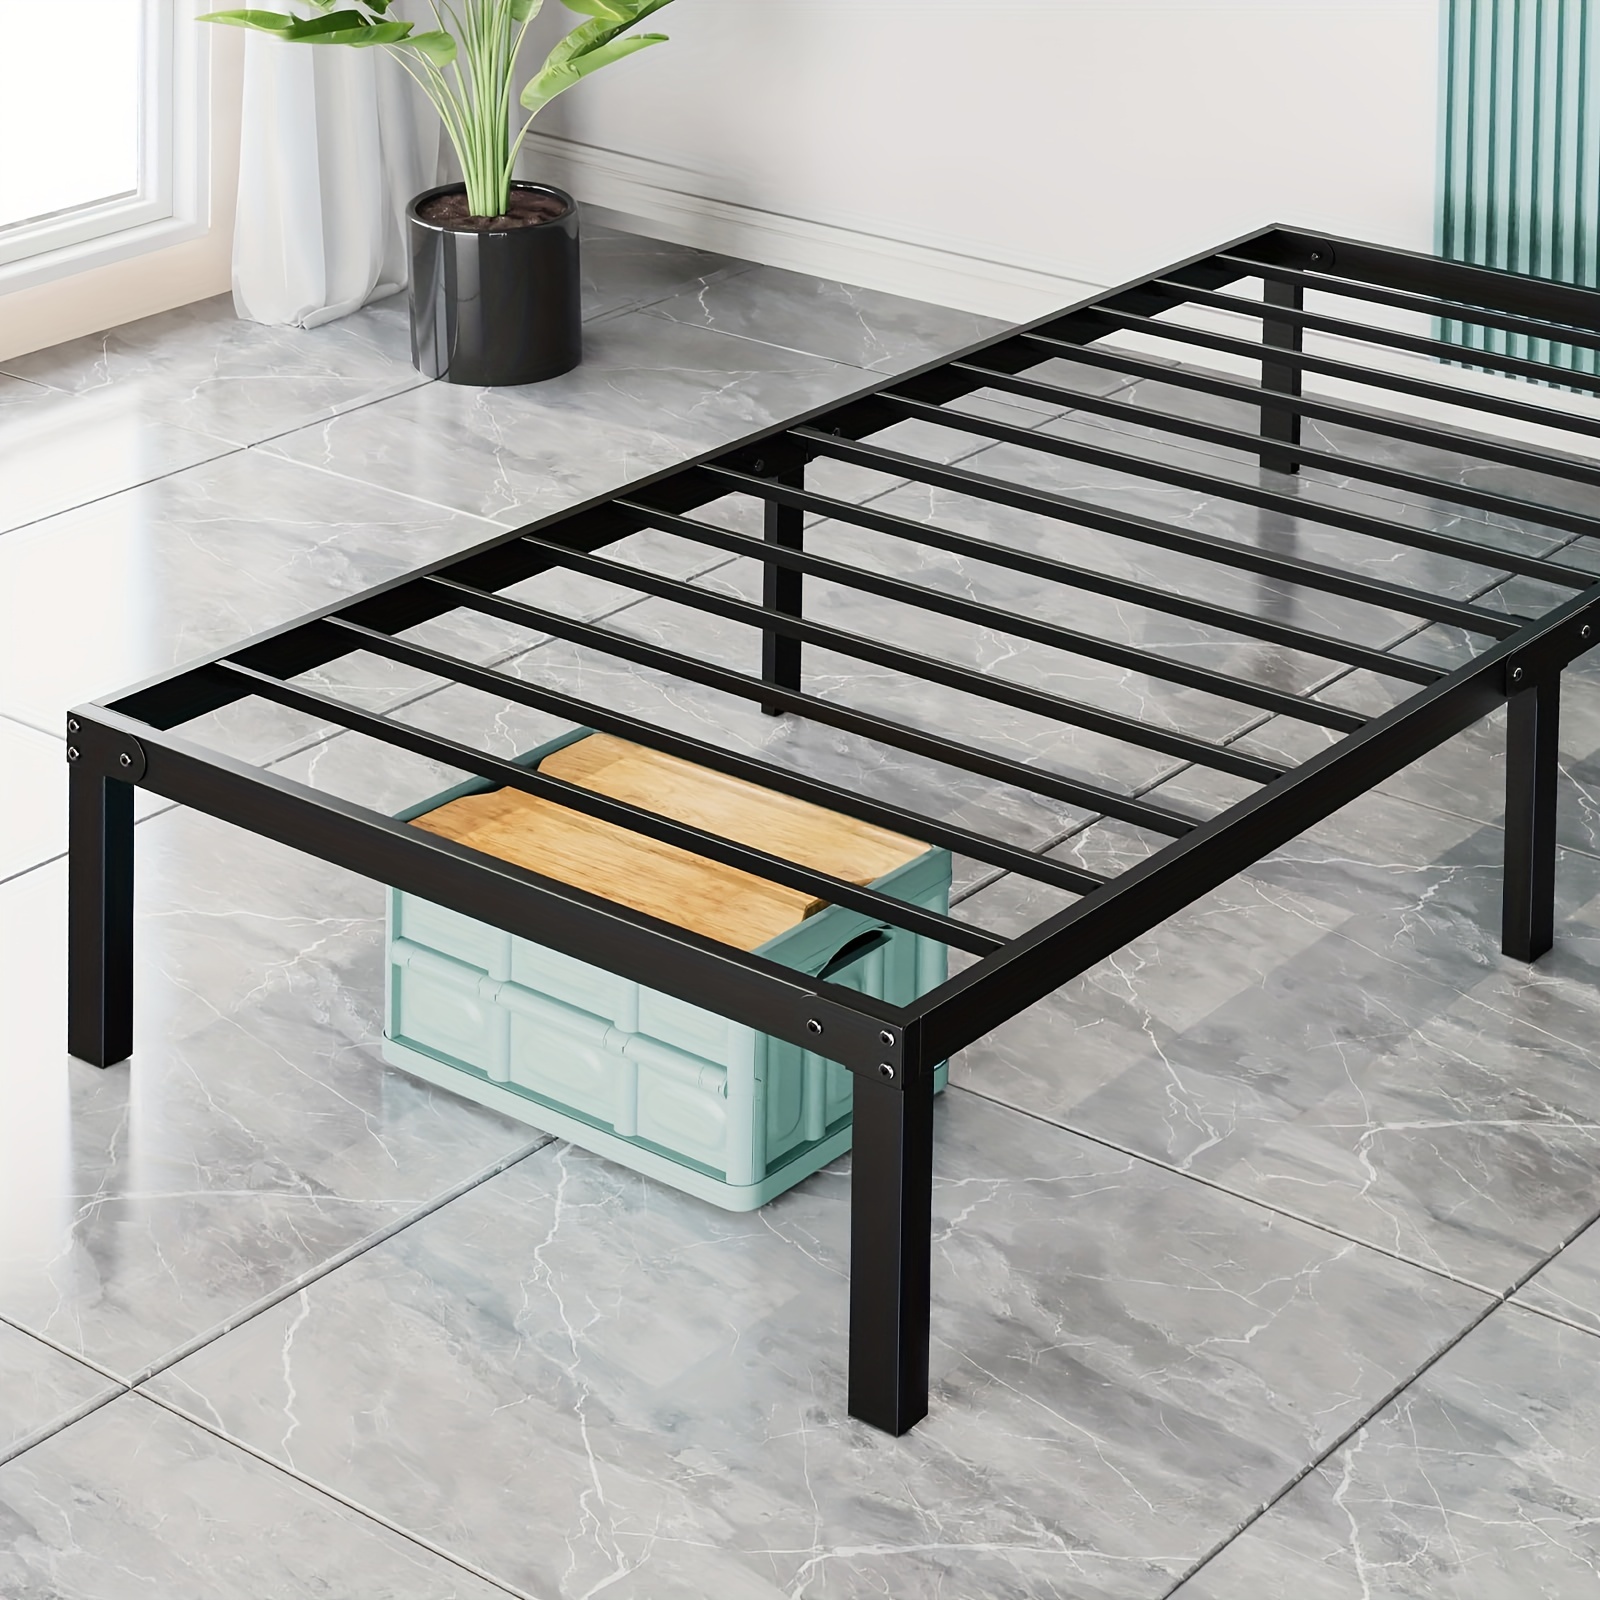 

Metal Bed Frame - Twin Size Metal Platform Bed Frame Mattress Foundation With Steel Slat Support, No Box Spring Needed, Storage Space Under Frame, Easy Assembly